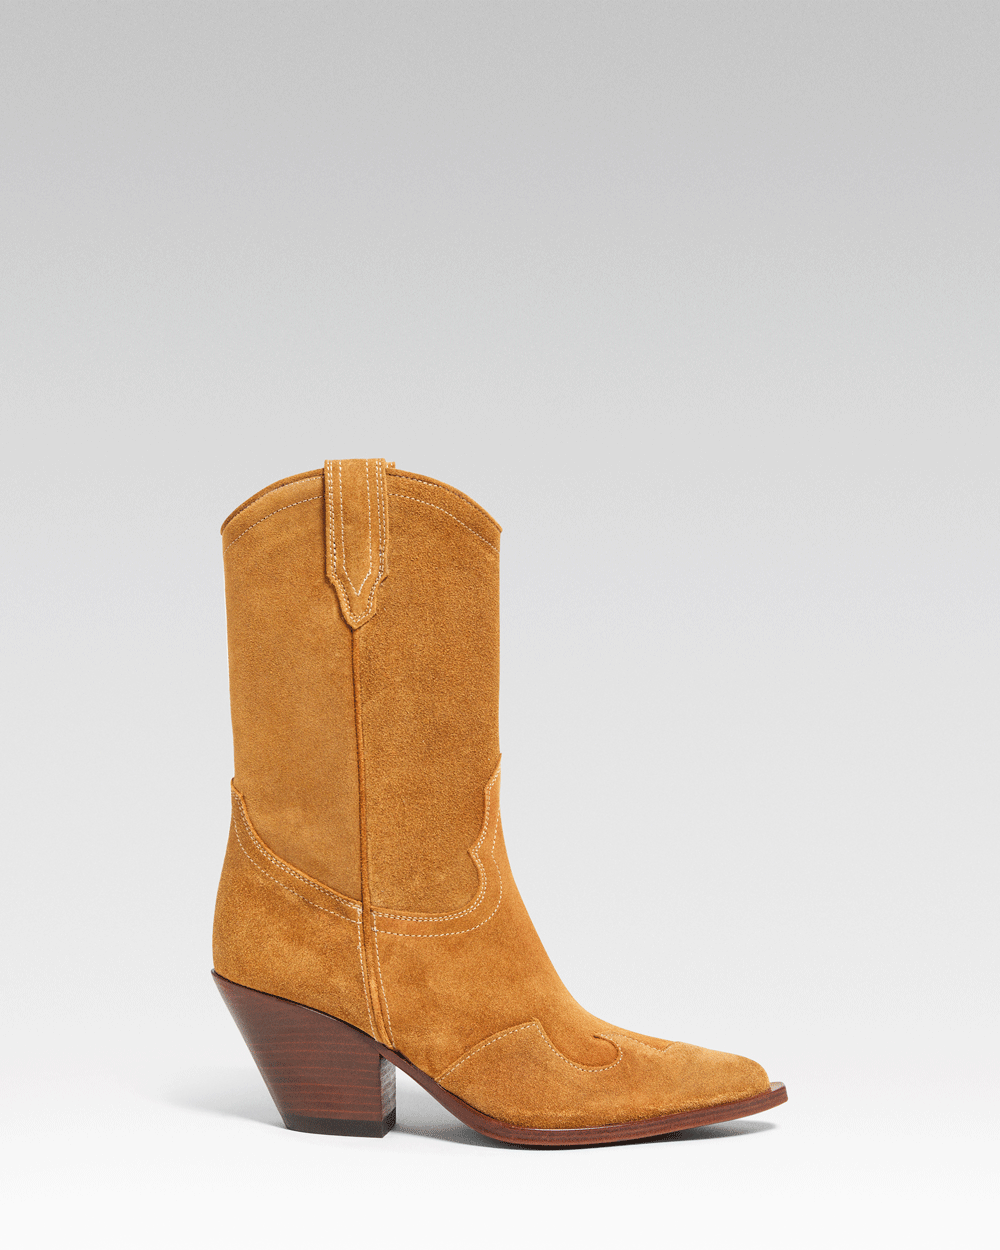 SANTA CLARA Women's Ankle Boots in Camel Suede